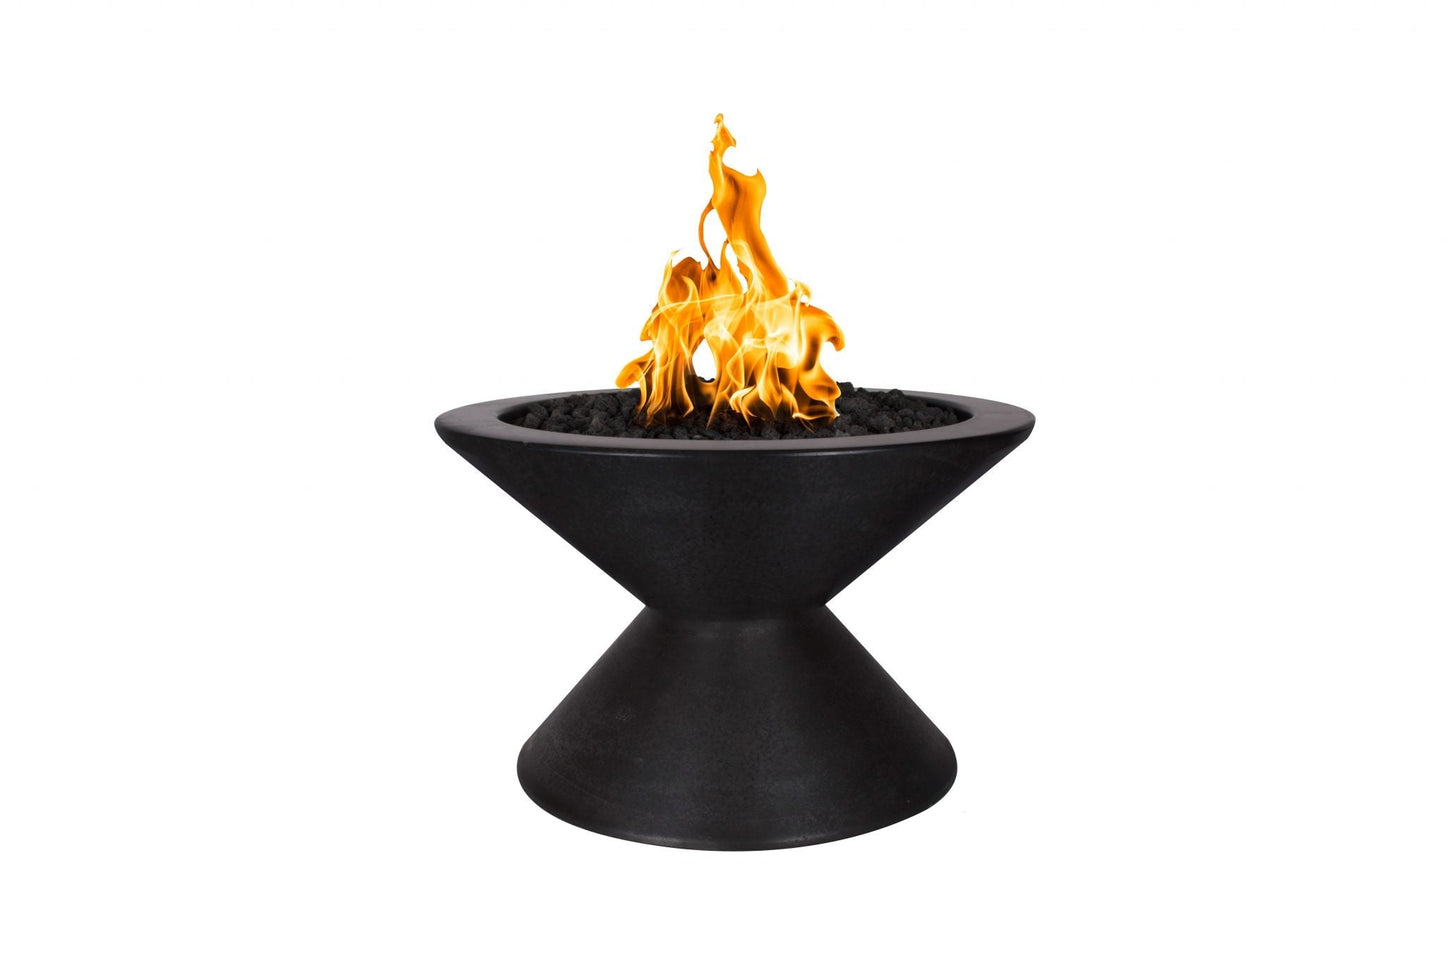 The Outdoor Plus Round Lucia 31" Metallic Copper GFRC Concrete Natural Gas Fire Pit with 12V Electronic Ignition